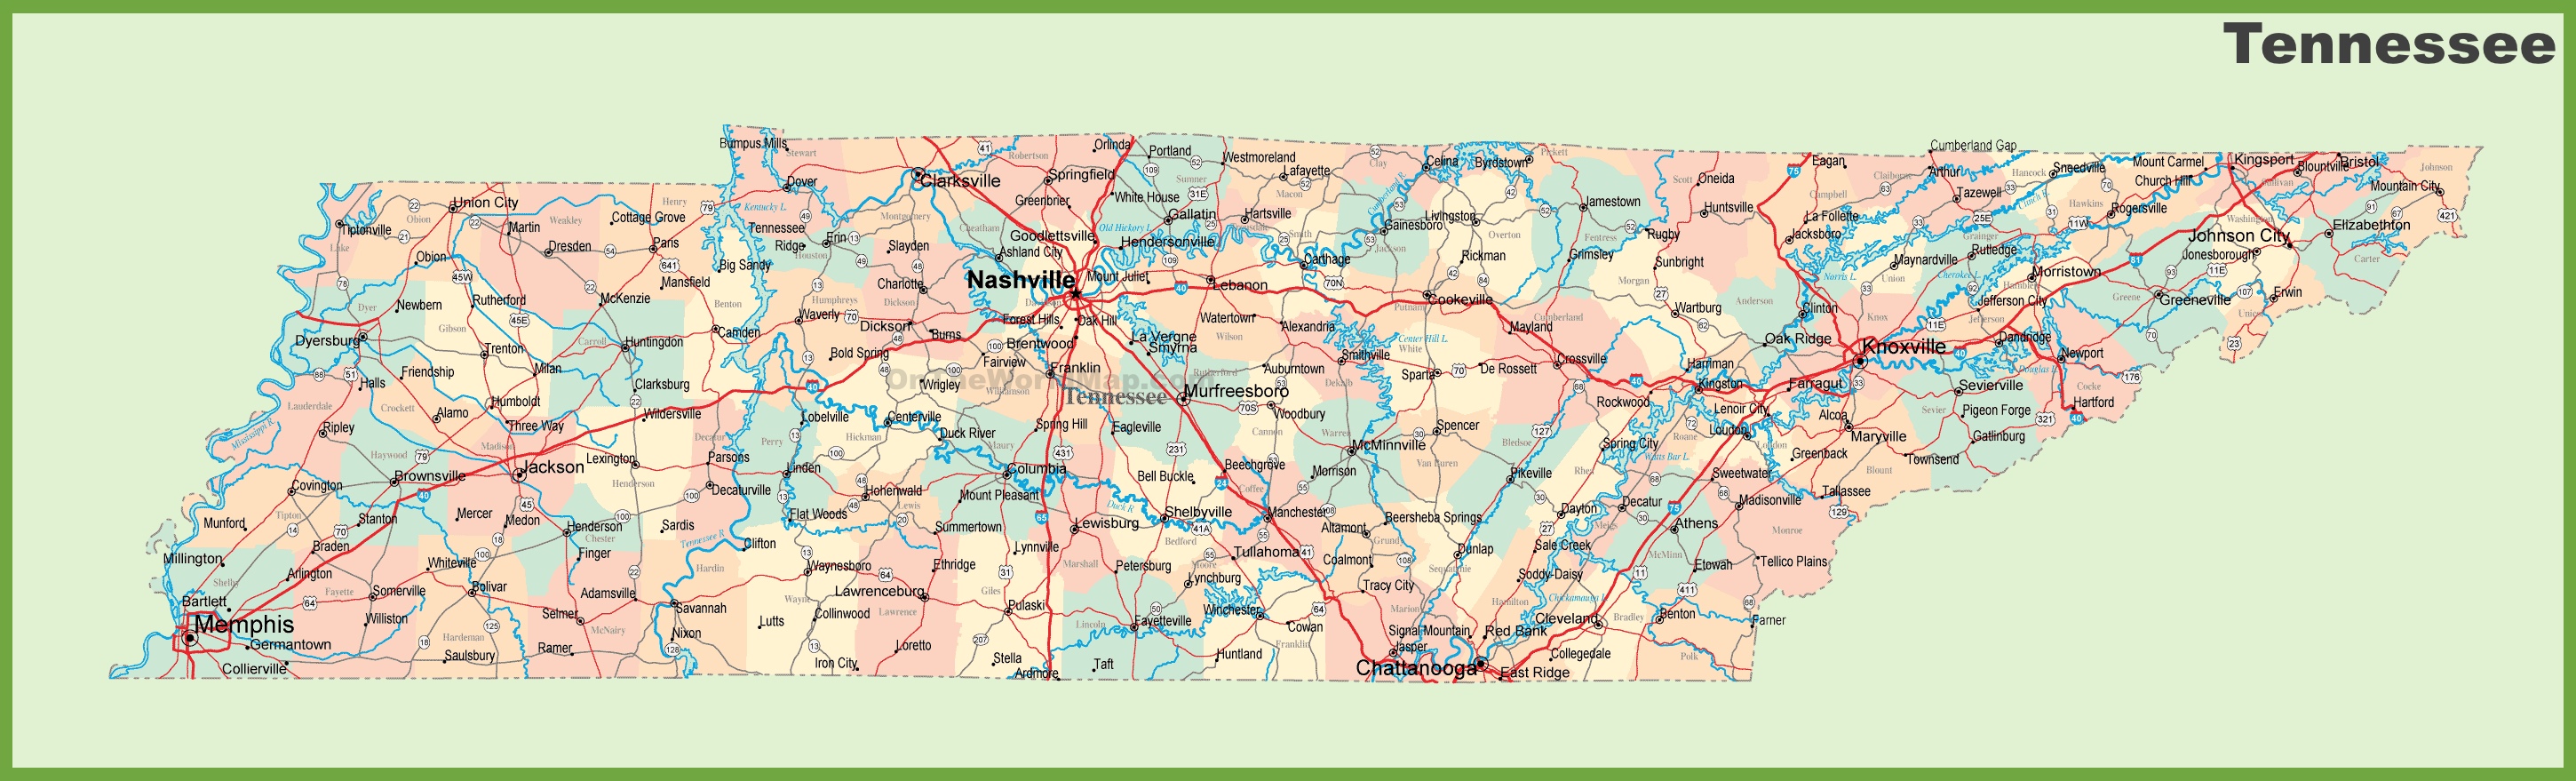 Road Map Of Tennessee With Cities